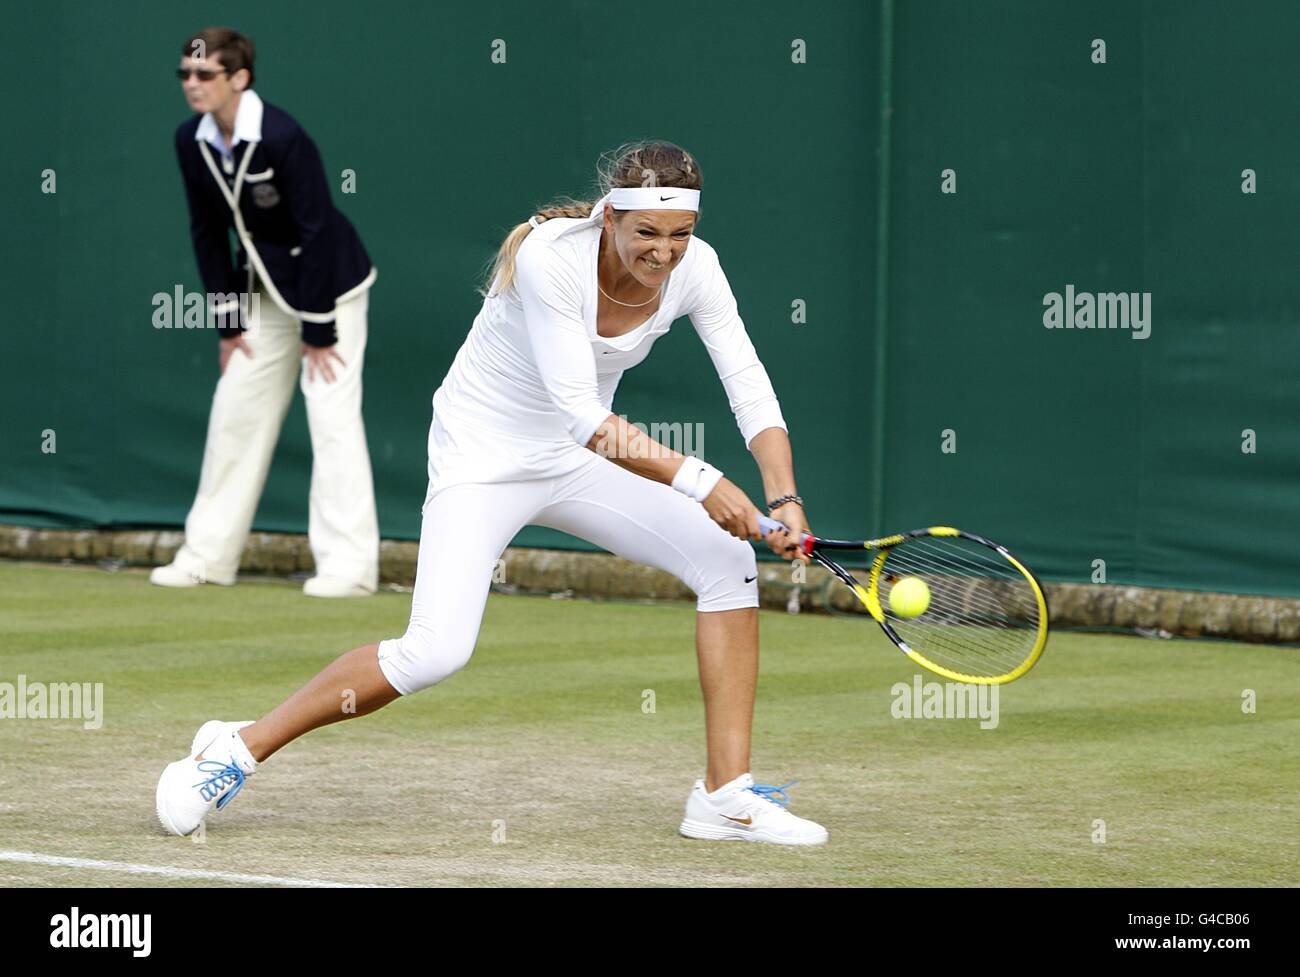 Belarus' Victoria Azarenka in action against Czech Republic's Iveta Benesova on day three of the 2011 Wimbledon Championships at the All England Lawn Tennis and Croquet Club, Wimbledon. Stock Photo